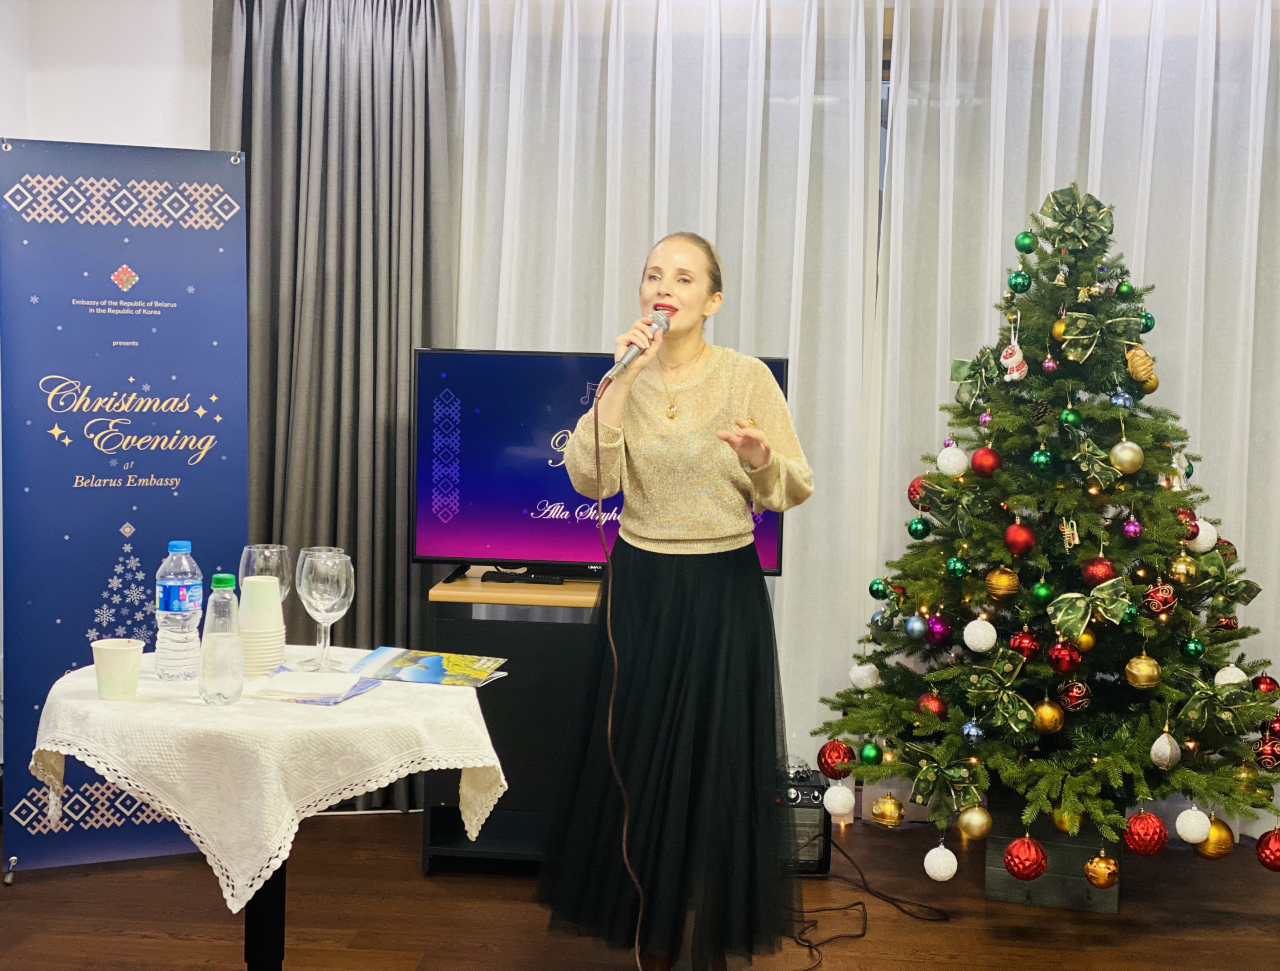 A Belarusian artist performs a song during orthodox Christmas celebrations at Embassy of Belarus in Yongsan-gu, Seoul on Friday. (Belarusian Embassy in Seoul)